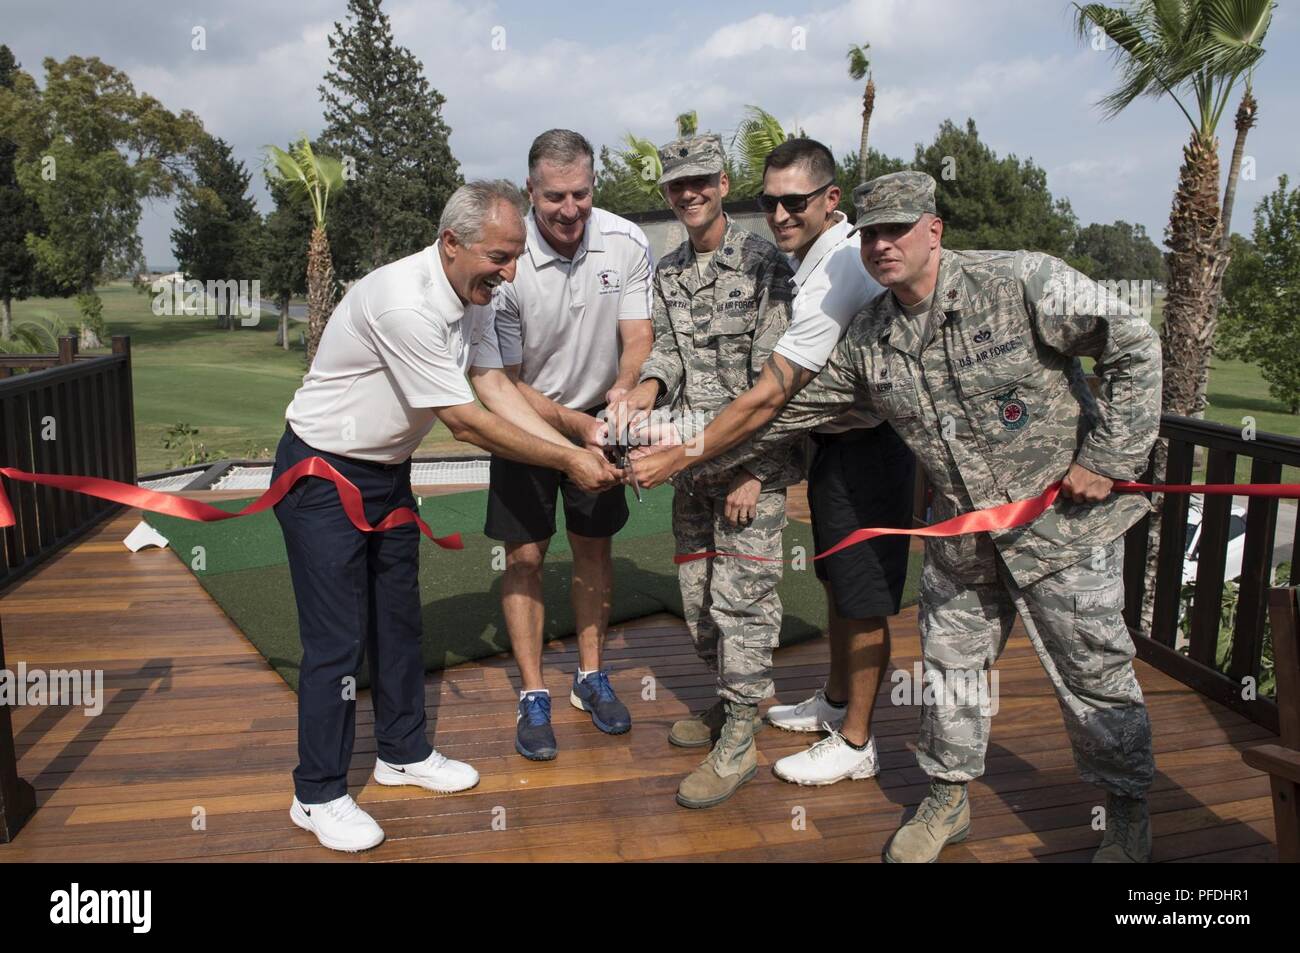 Hodja Lakes Golf Course manager and U.S. Air Force commanders cut the ribbon during a ceremony for the U.S. Air Force’s first elevated tee box at the Hodja Lakes Golf Course, Incirlik Air Base, Turkey, June 12, 2018. The tee box gives golfers a different angle to shoot from, and provides tables and hammocks for leisure. Stock Photo